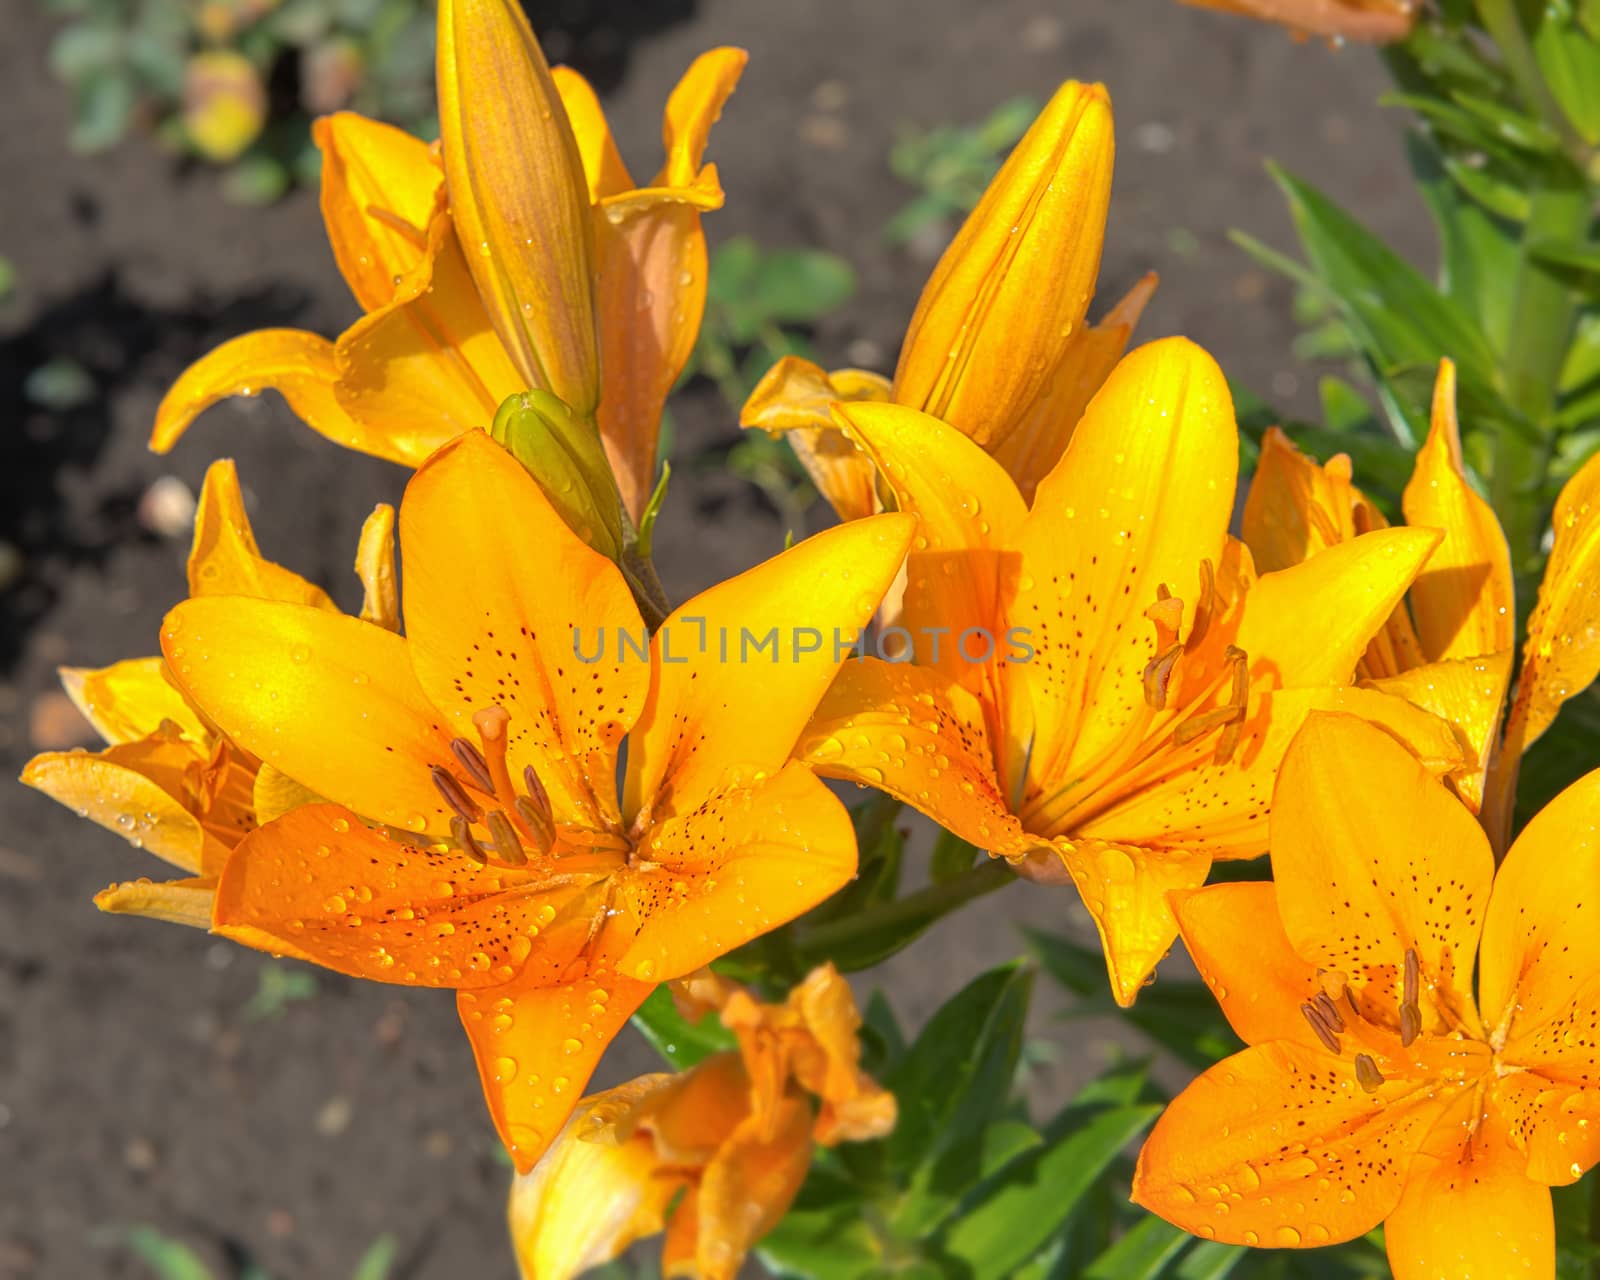 A closeup view of a variety of orange tiger lilies after rain on garden.